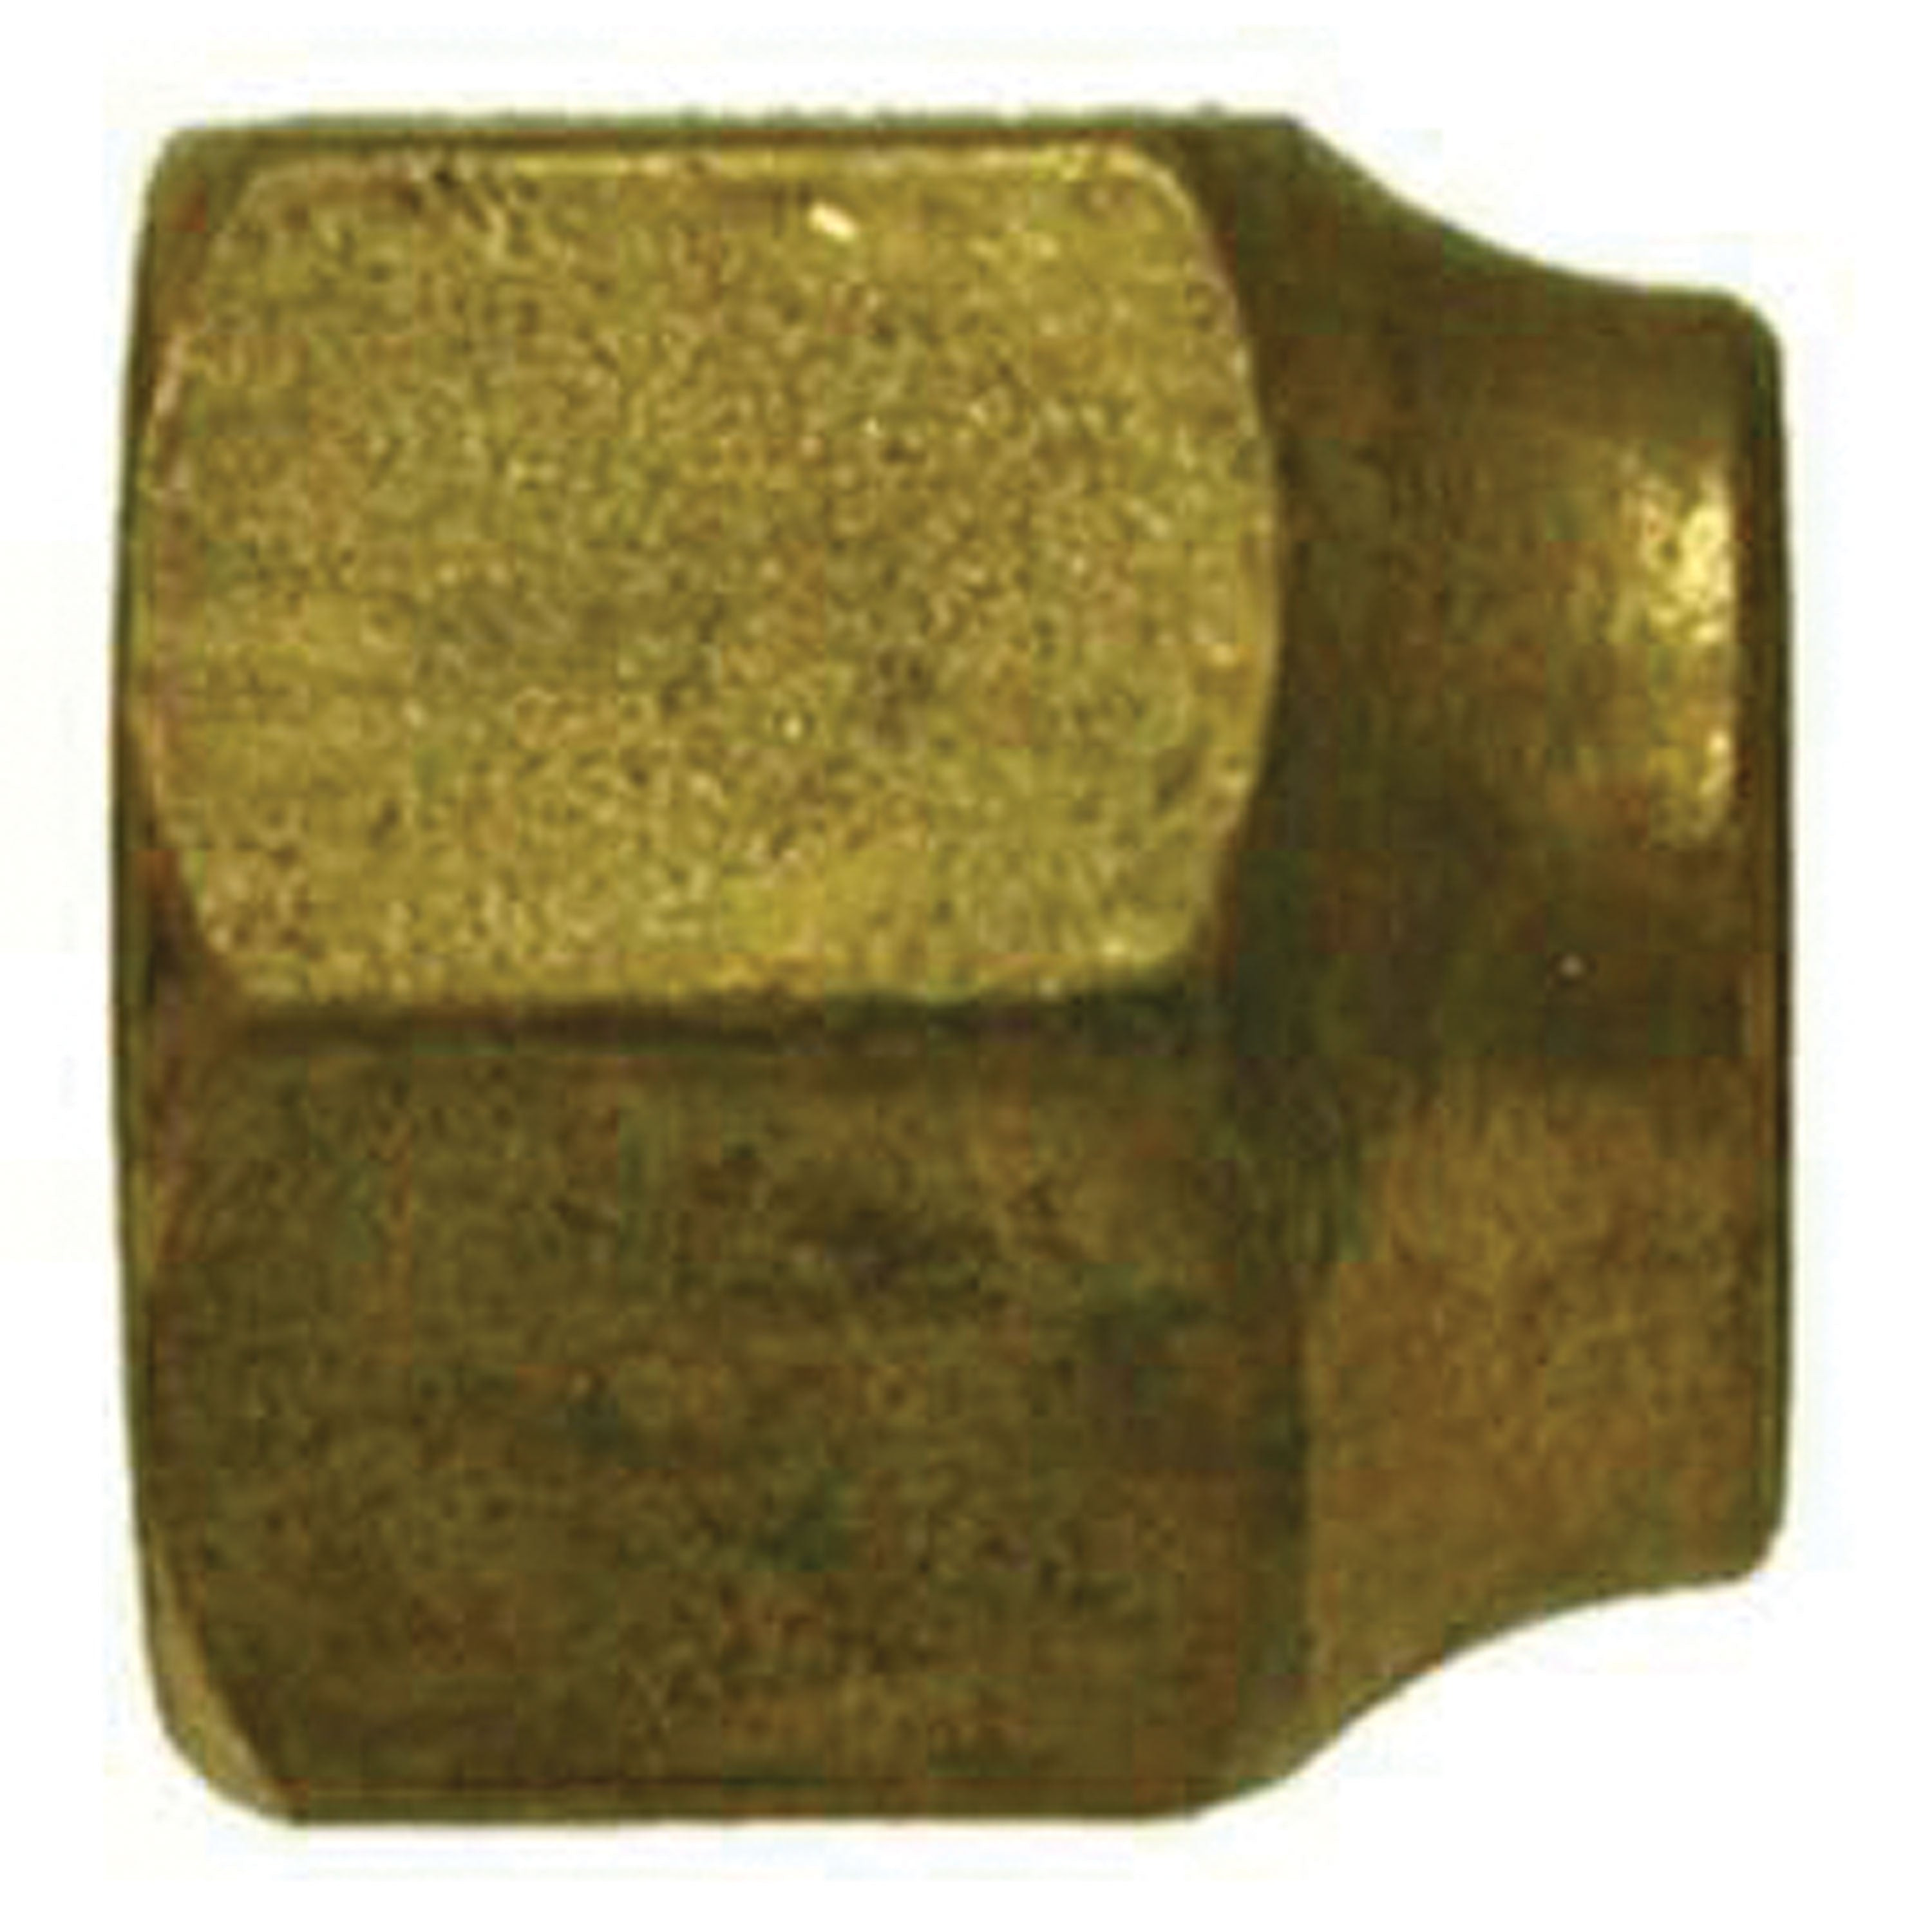 Midland Metal 10-041 SAE 45 Degree Flare Short Forged Nut - 3/8 in., Each